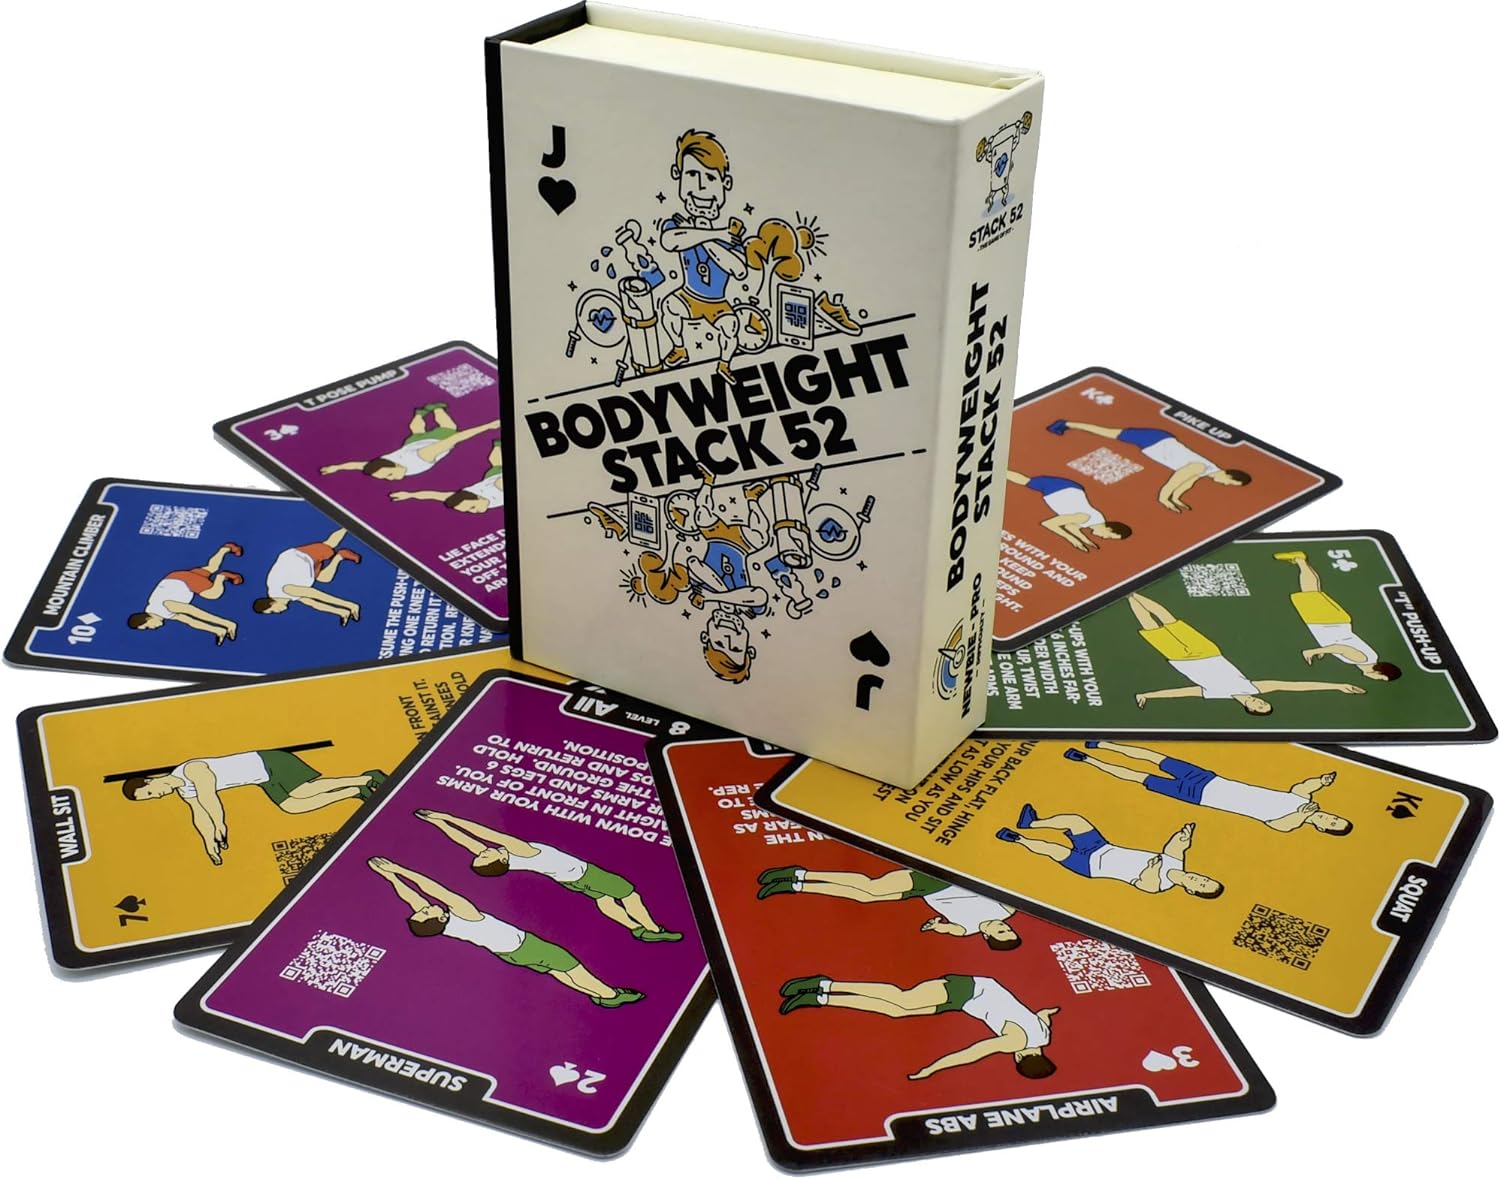 Stack 52 Bodyweight Exercise Cards Review